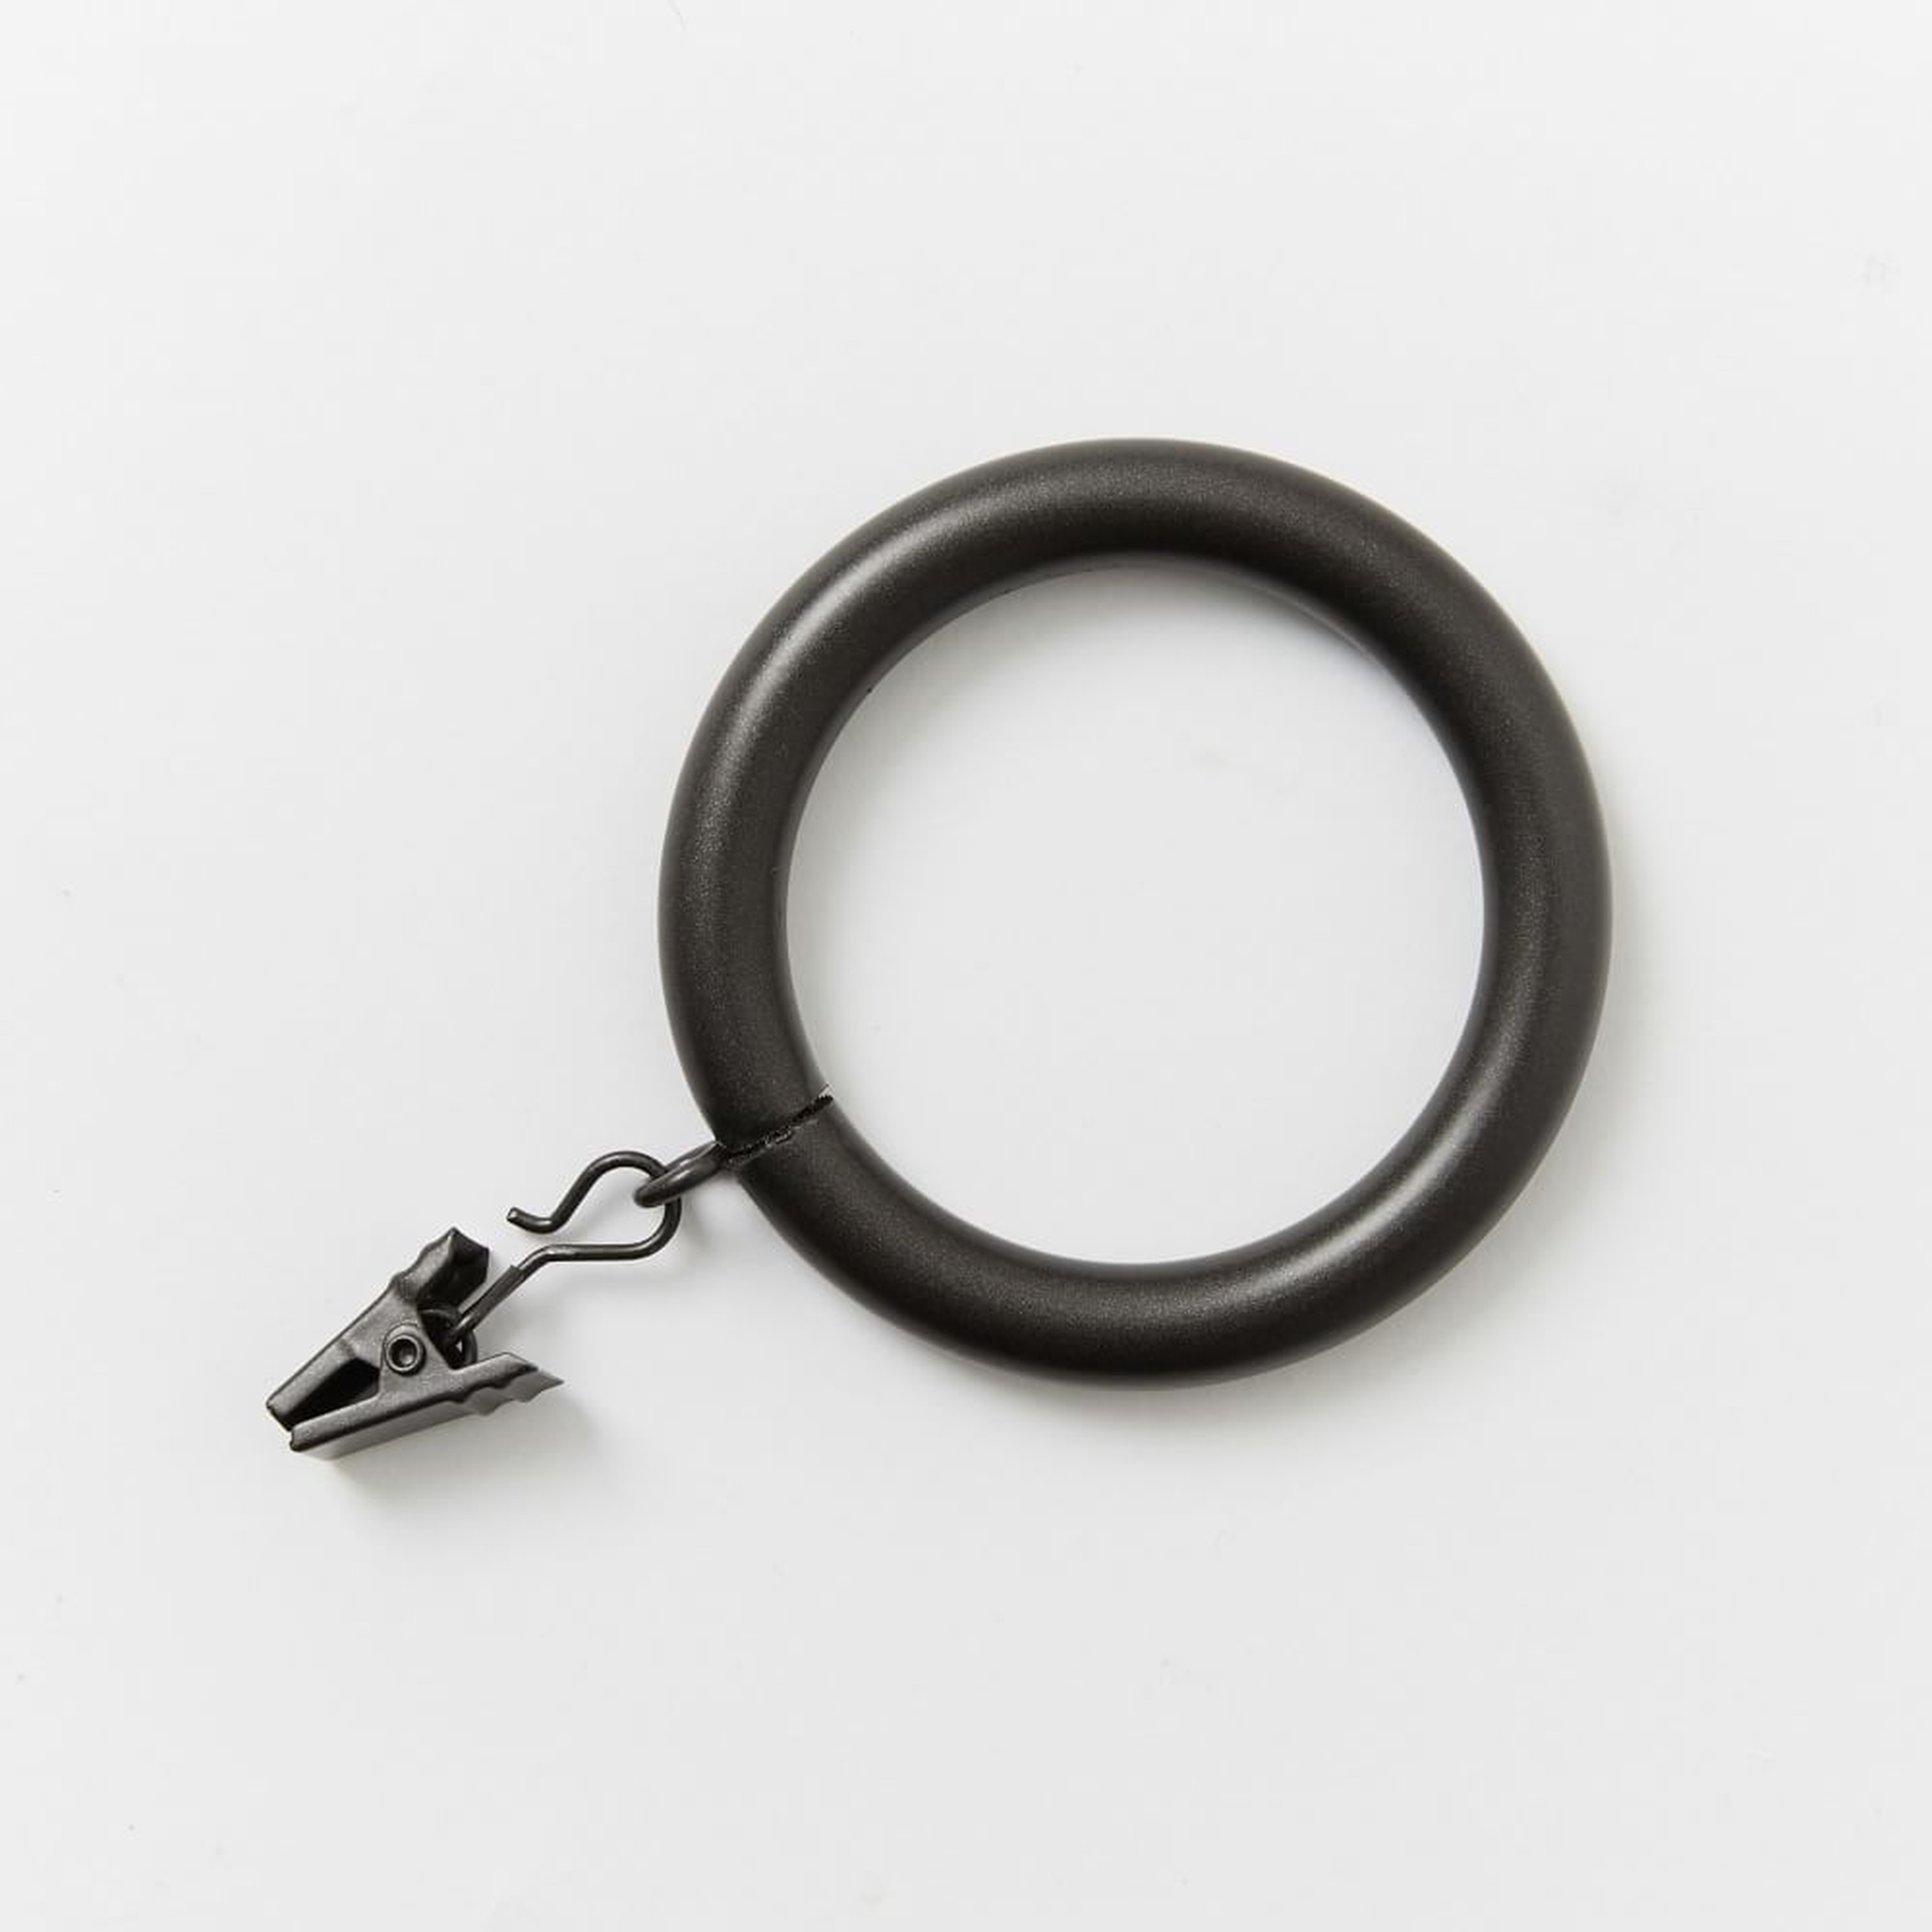 Oversized Metal Curtain Rings with Clips, Dark Bronze, Set of 7 - West Elm